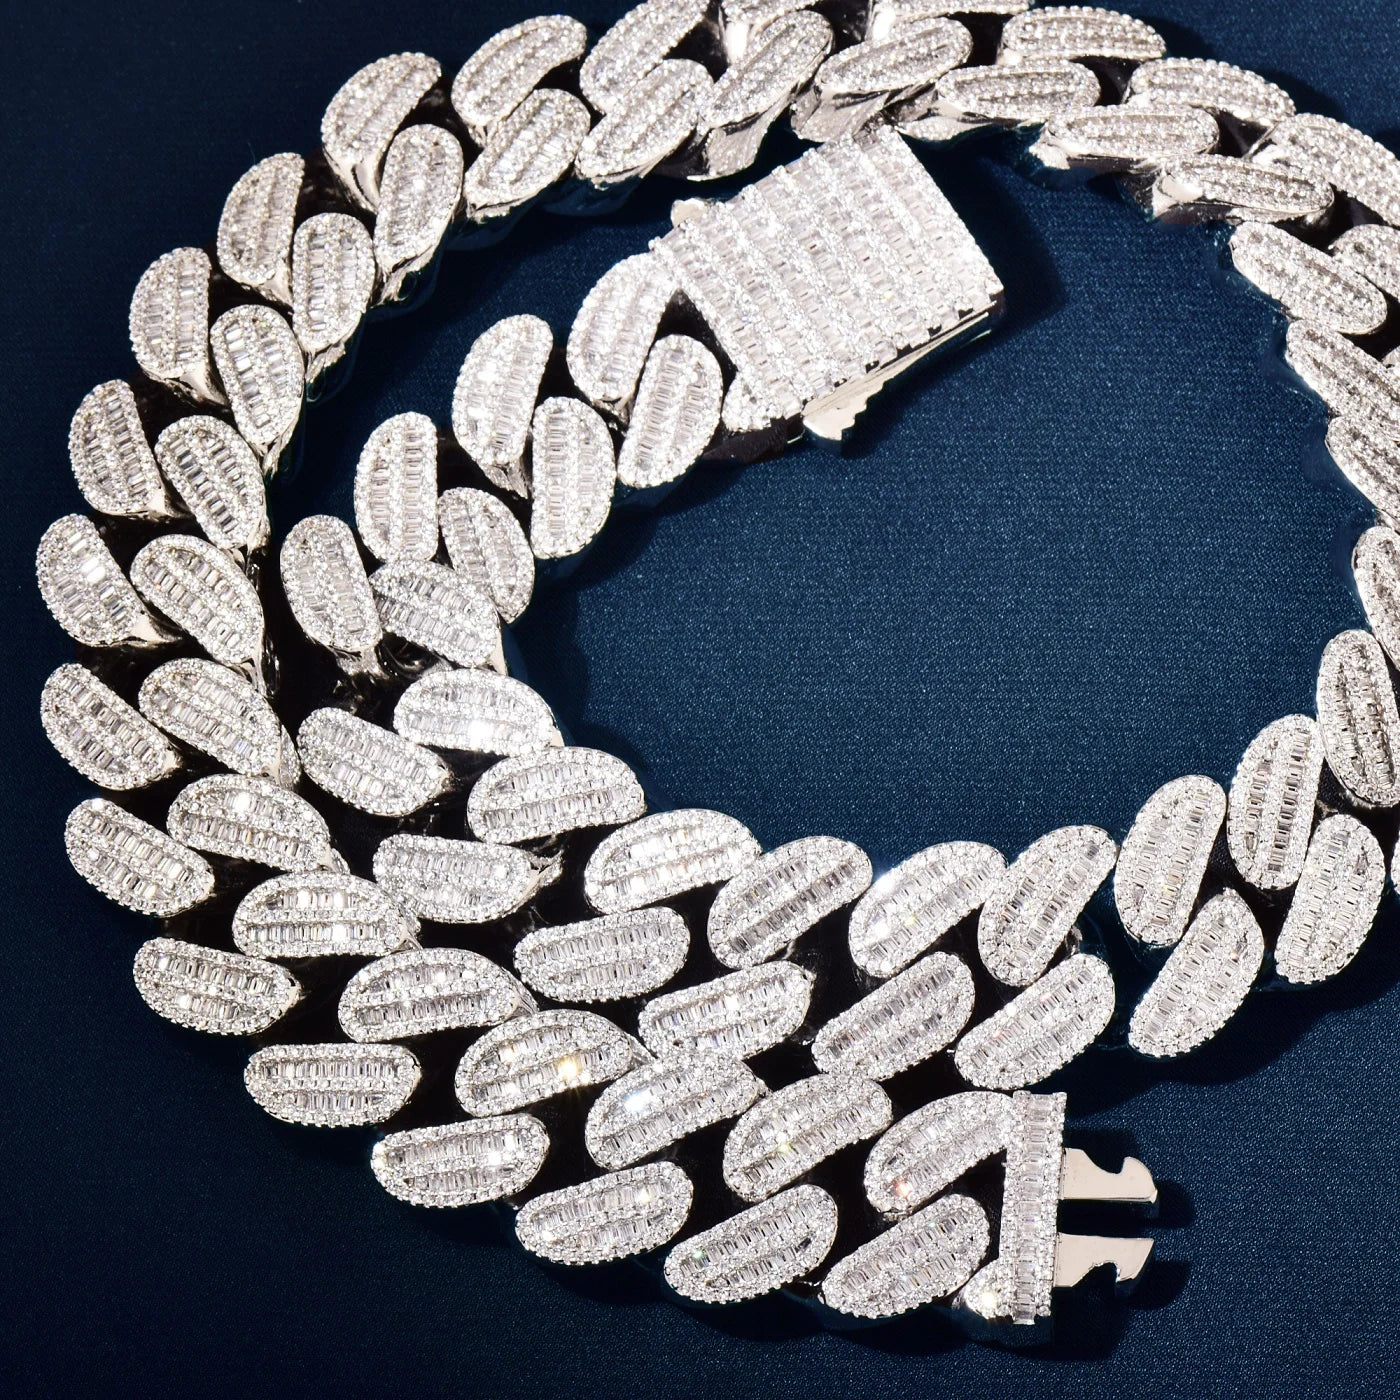 21mm Miami Baguette Cuban Link Chain Necklace - Gold/White Gold